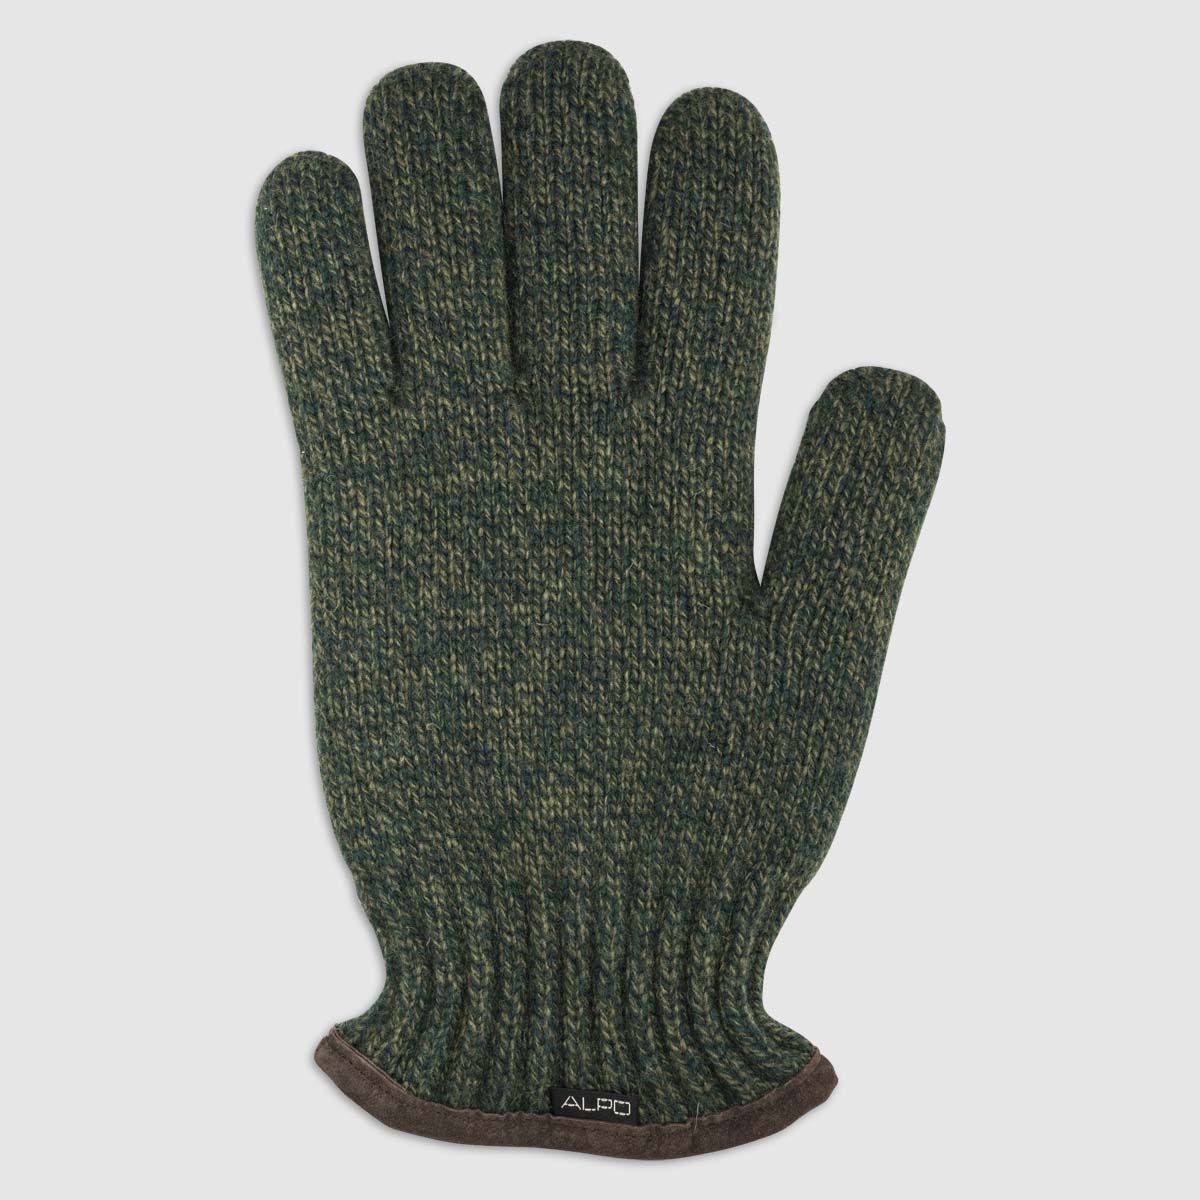 Mouliné Wool Glove with Fleece Lining